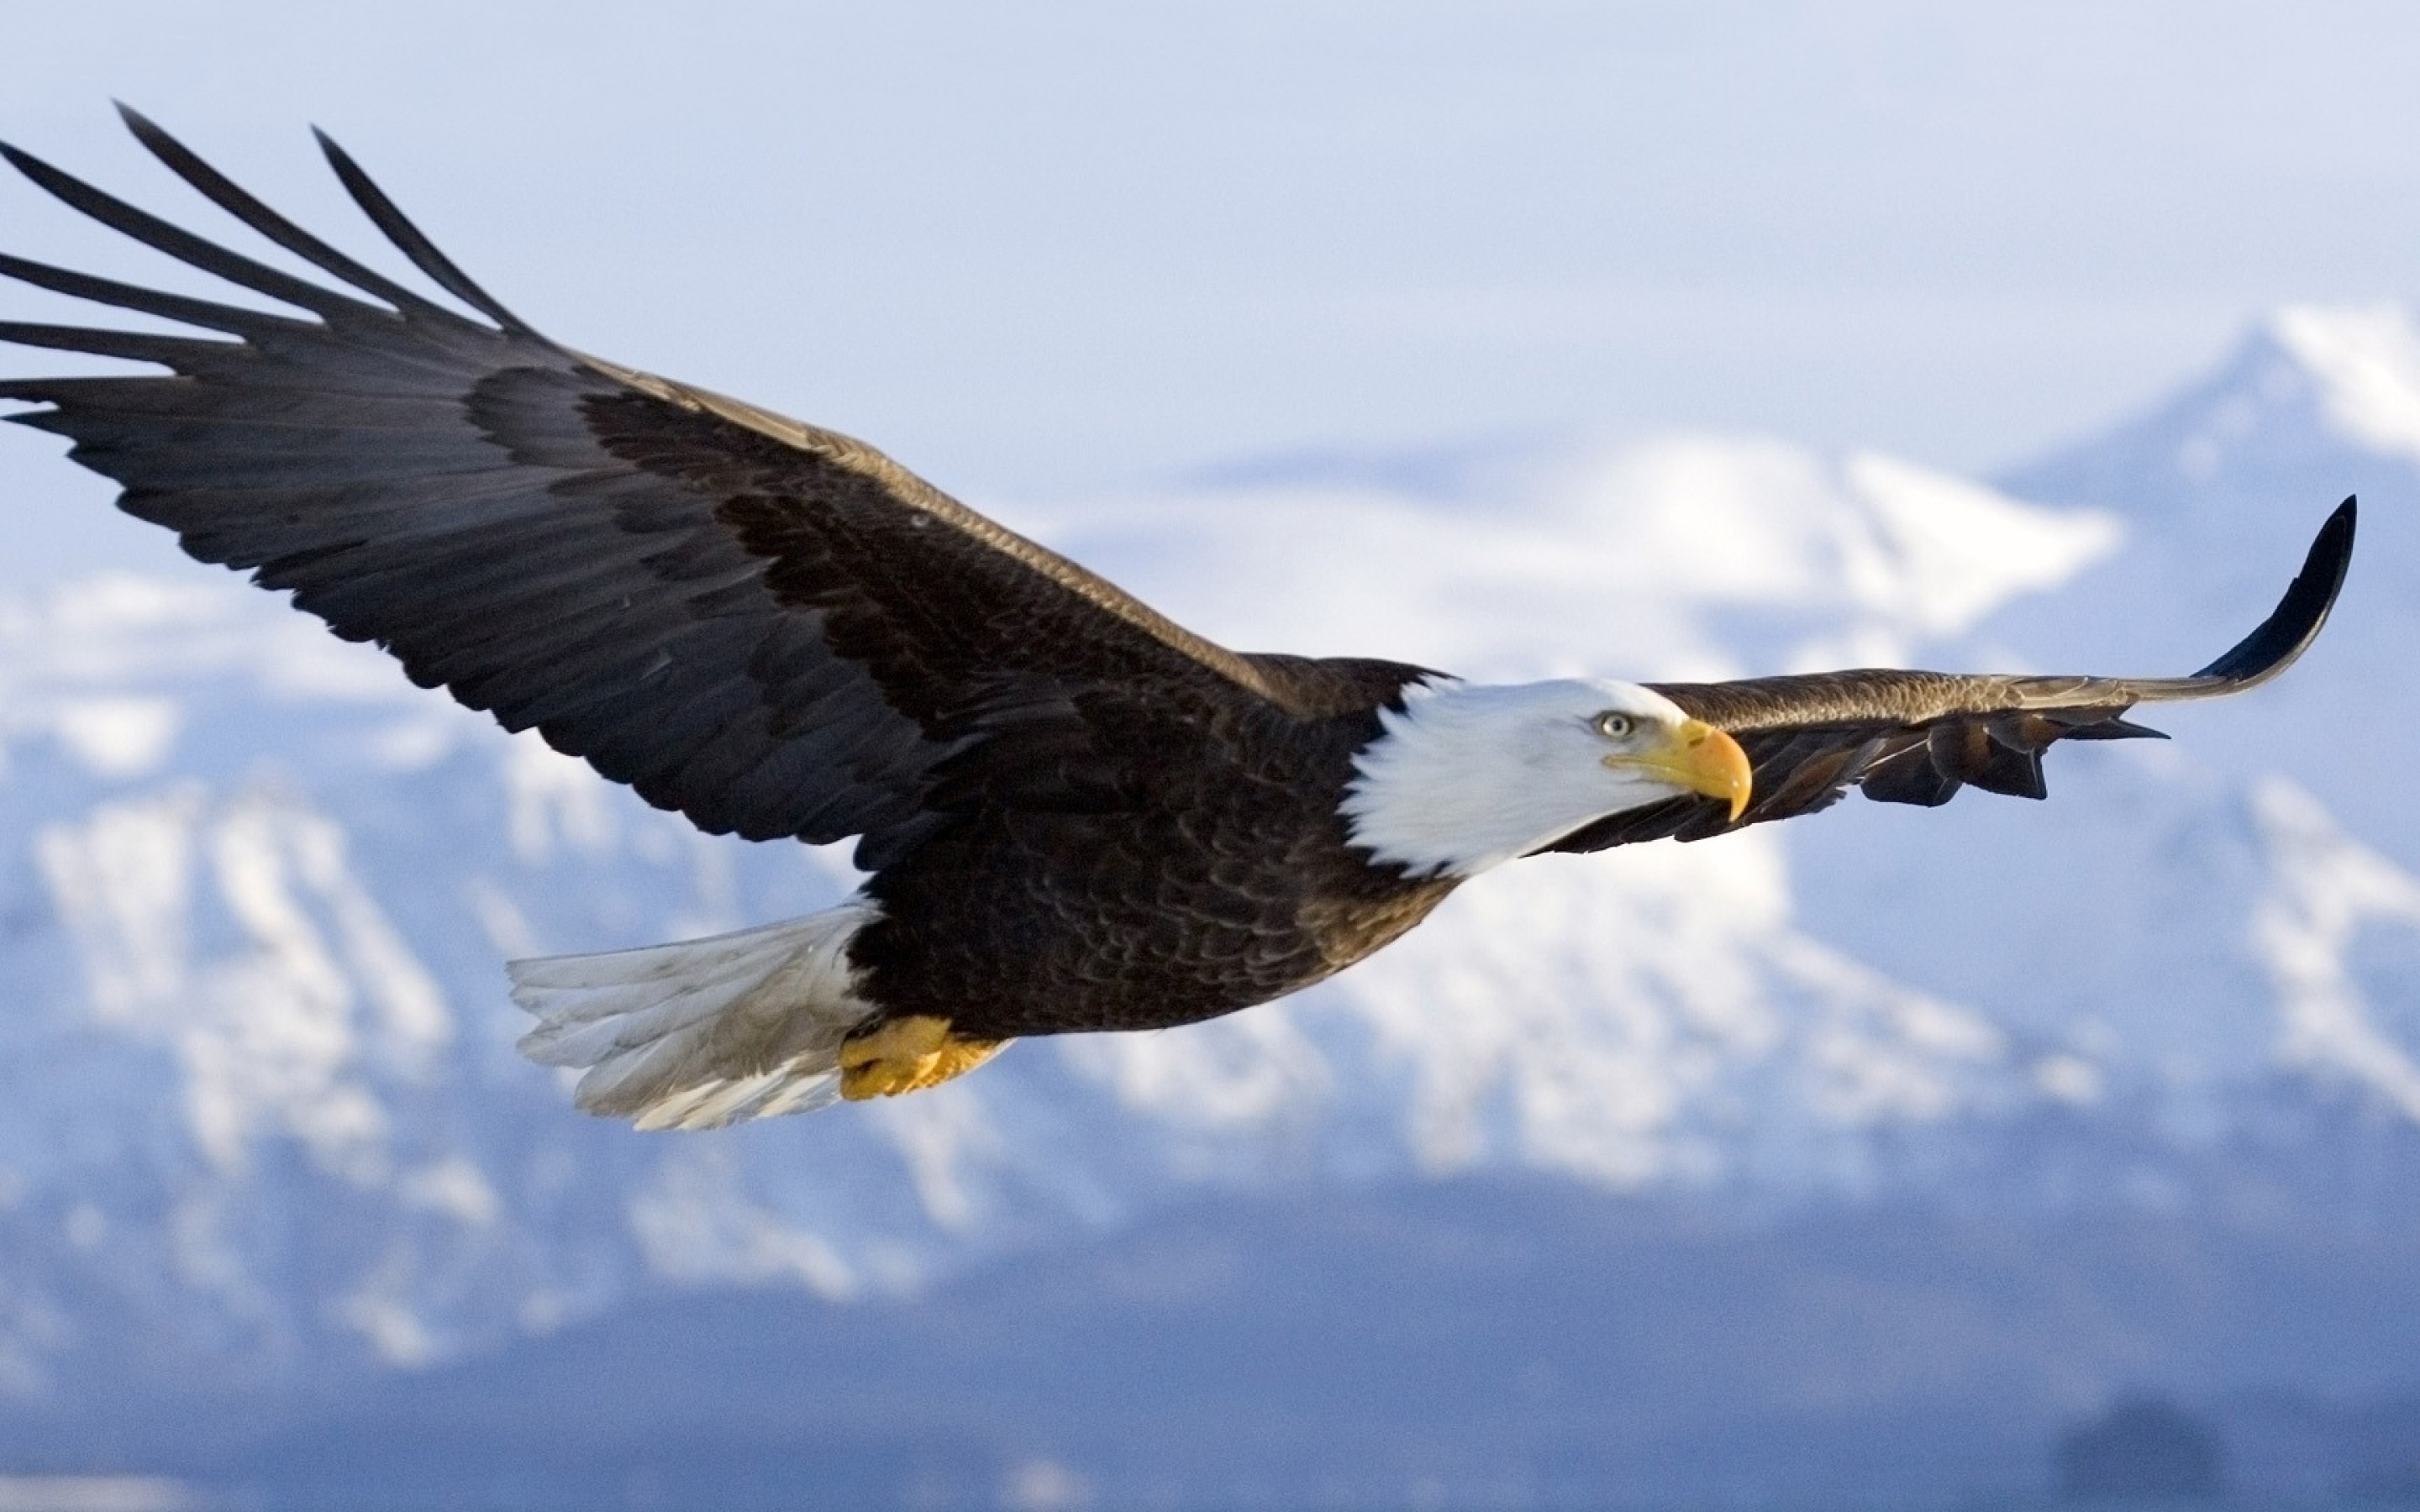 Bald eagles are capable of seeing fish in the water from several